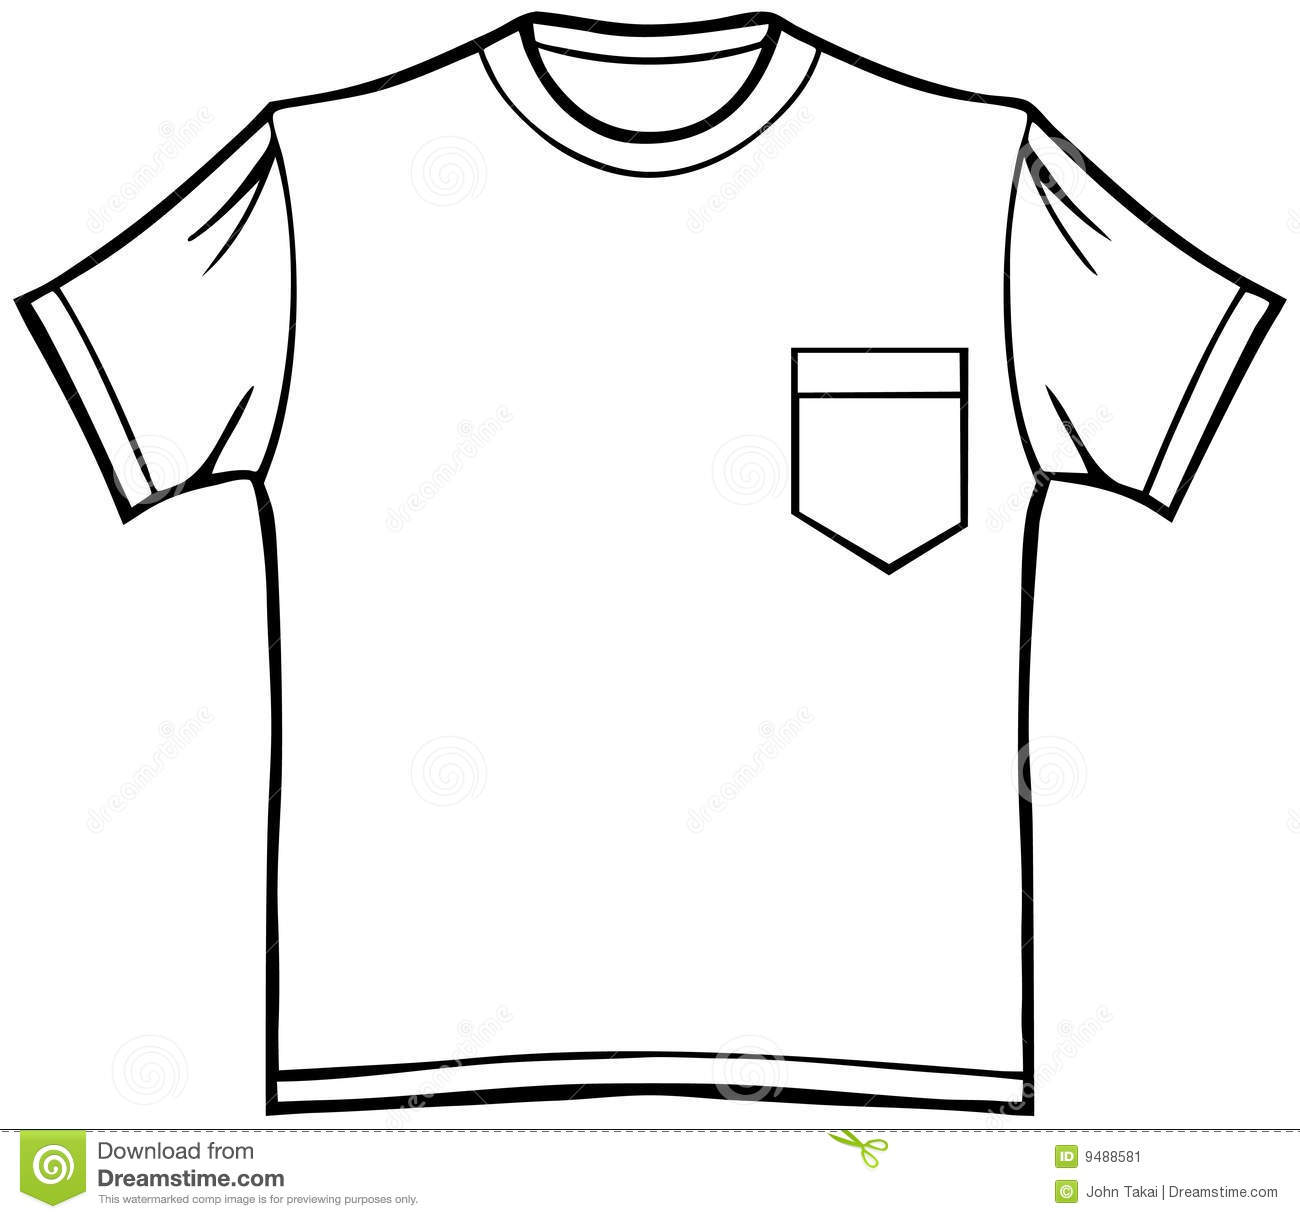 Clothing Line Art   T Shirt With Pocket   Black And White